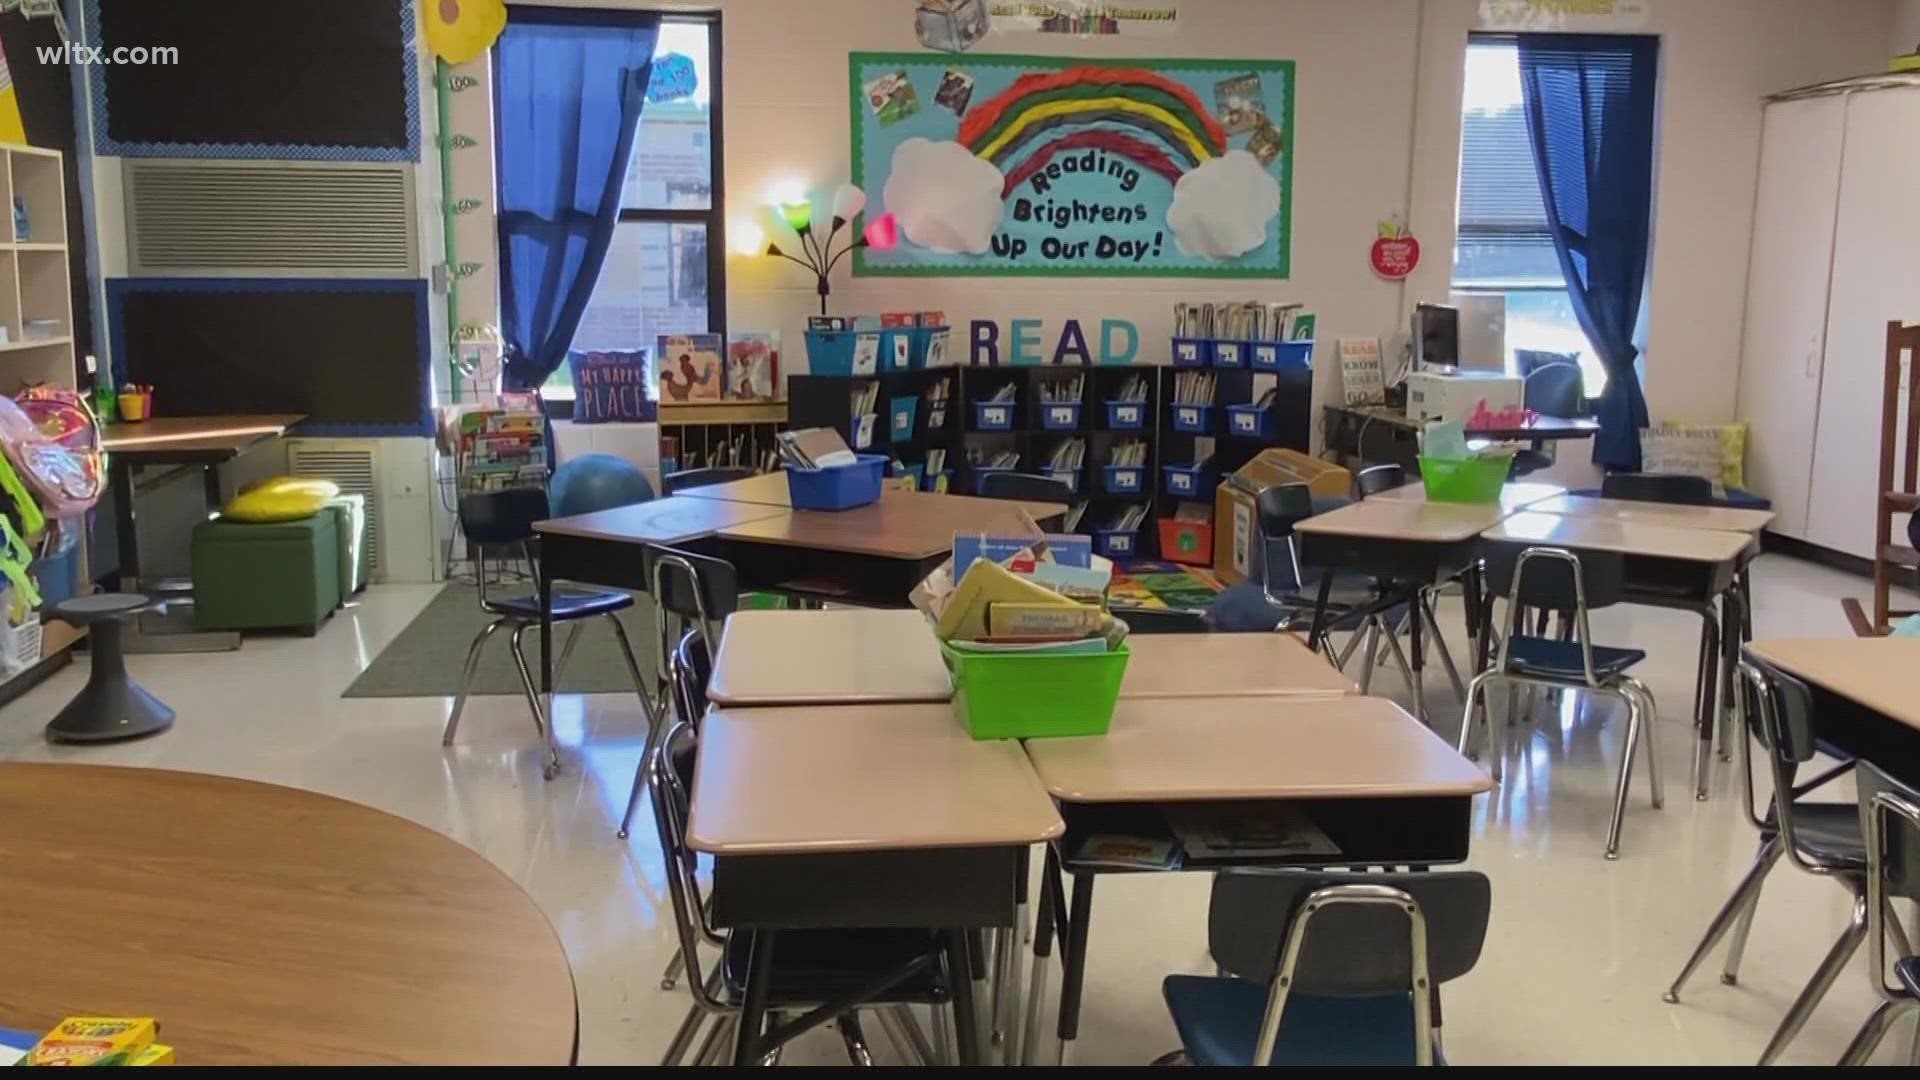 Several midlands school districts are facing some type of teacher shortage.